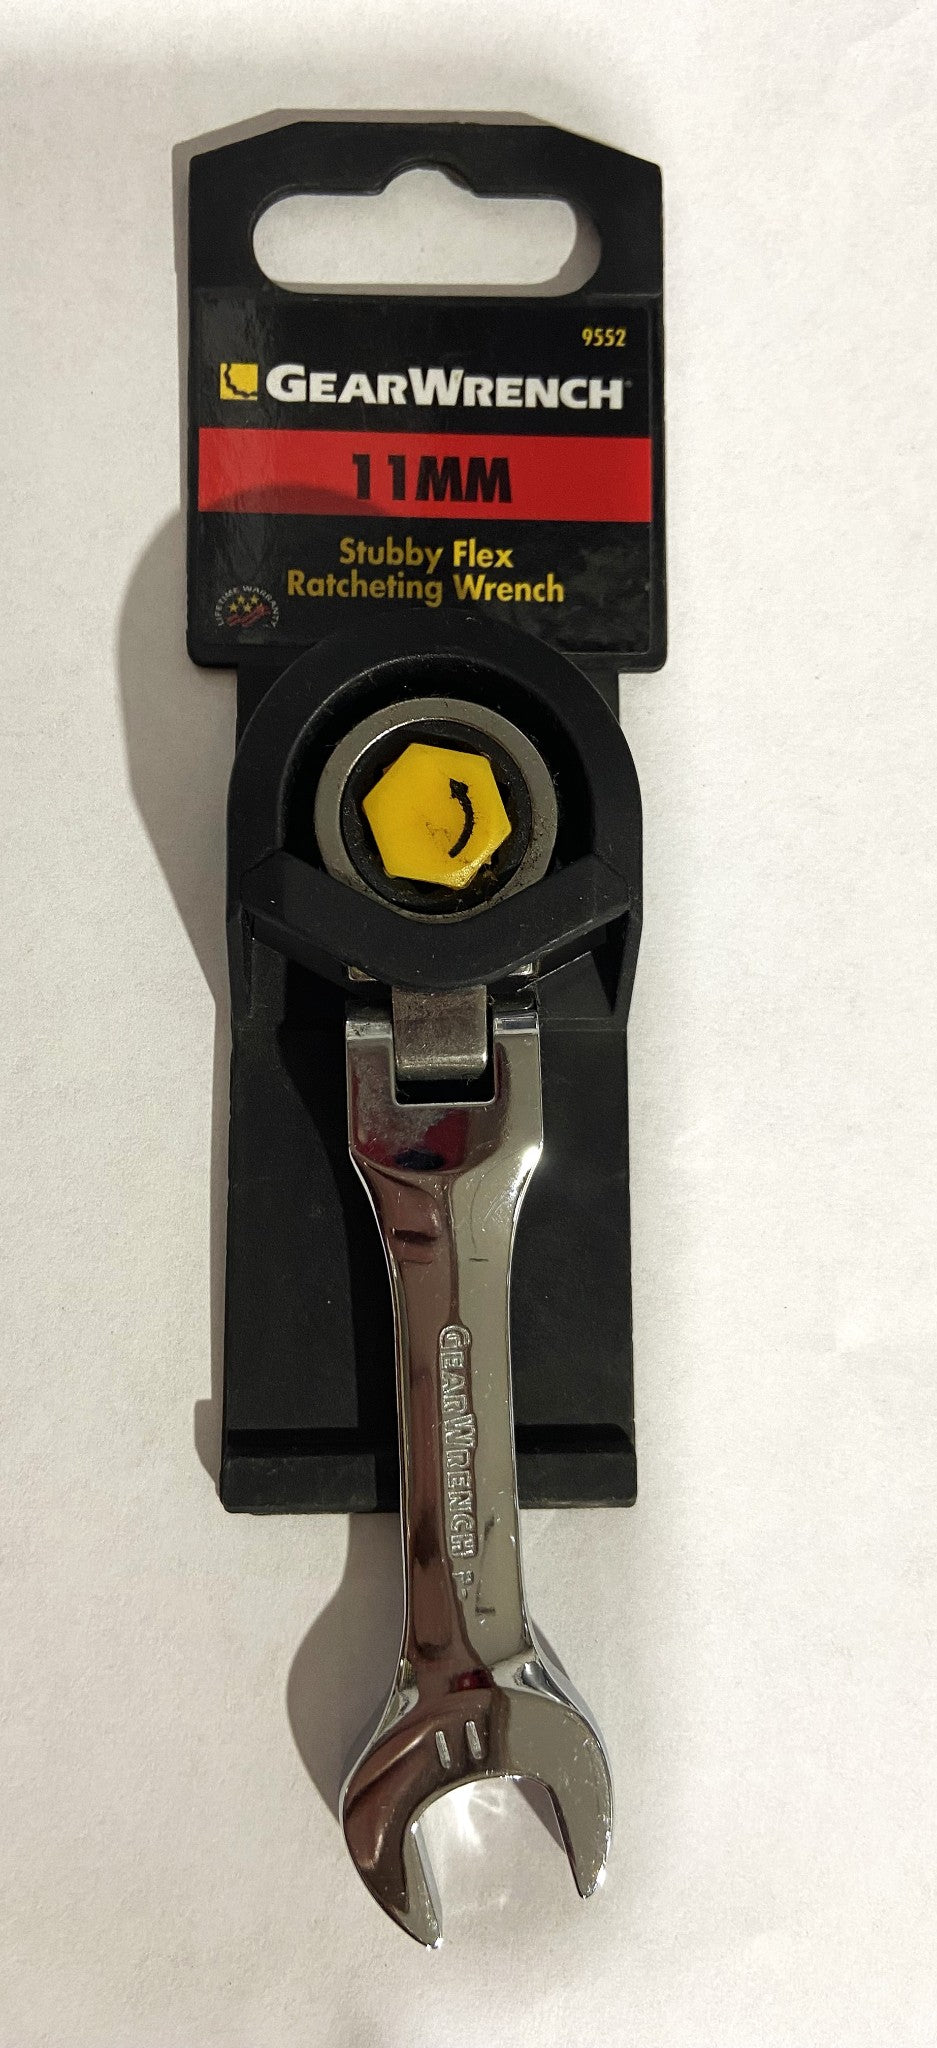 GEARWRENCH 9552 11mm Stubby Flex Head Ratcheting Combination Wrench